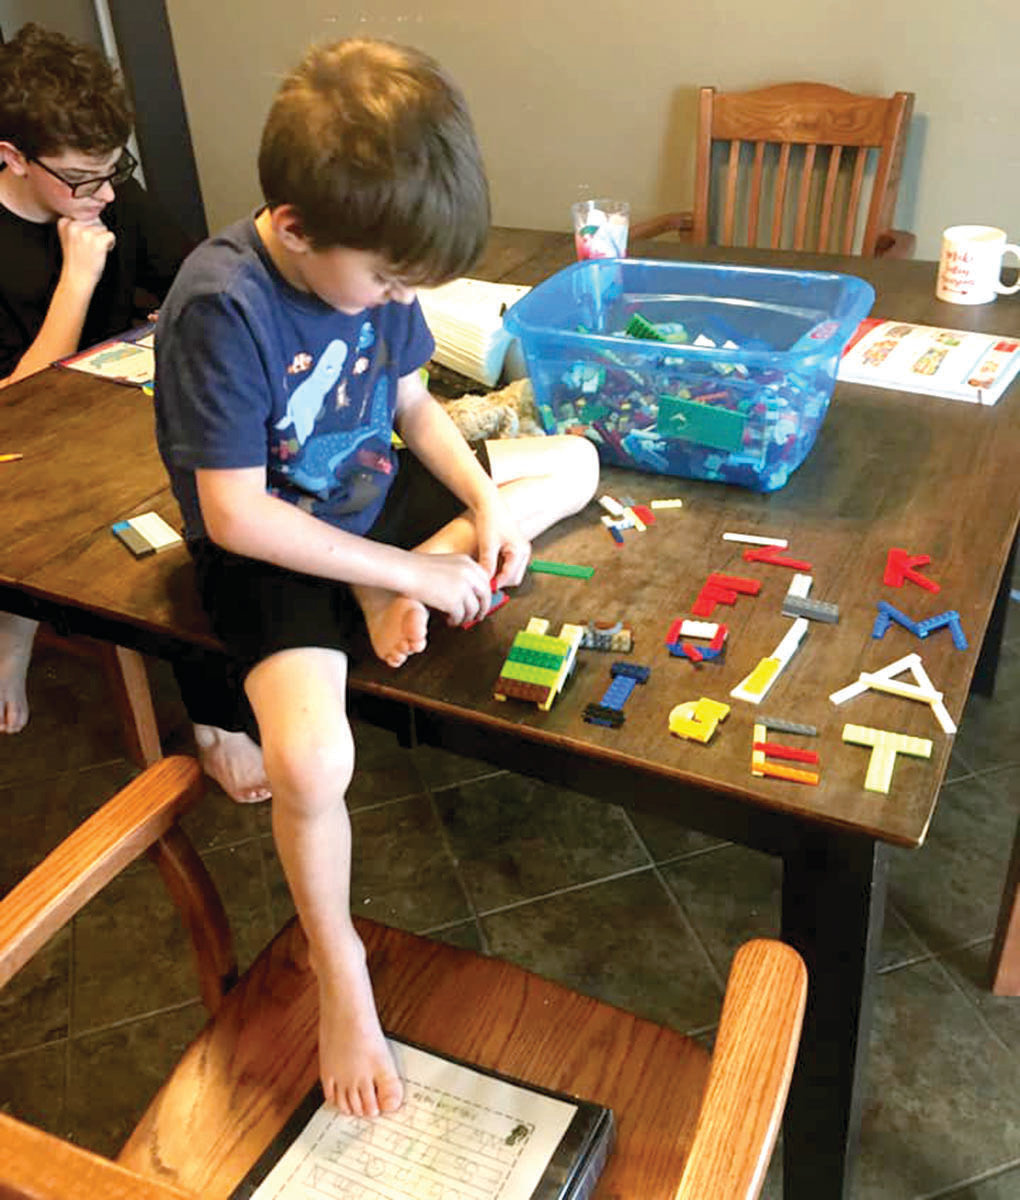 Megan Pritchard made letters using Legos Gabriel and Daniel could use during schoolwork time.